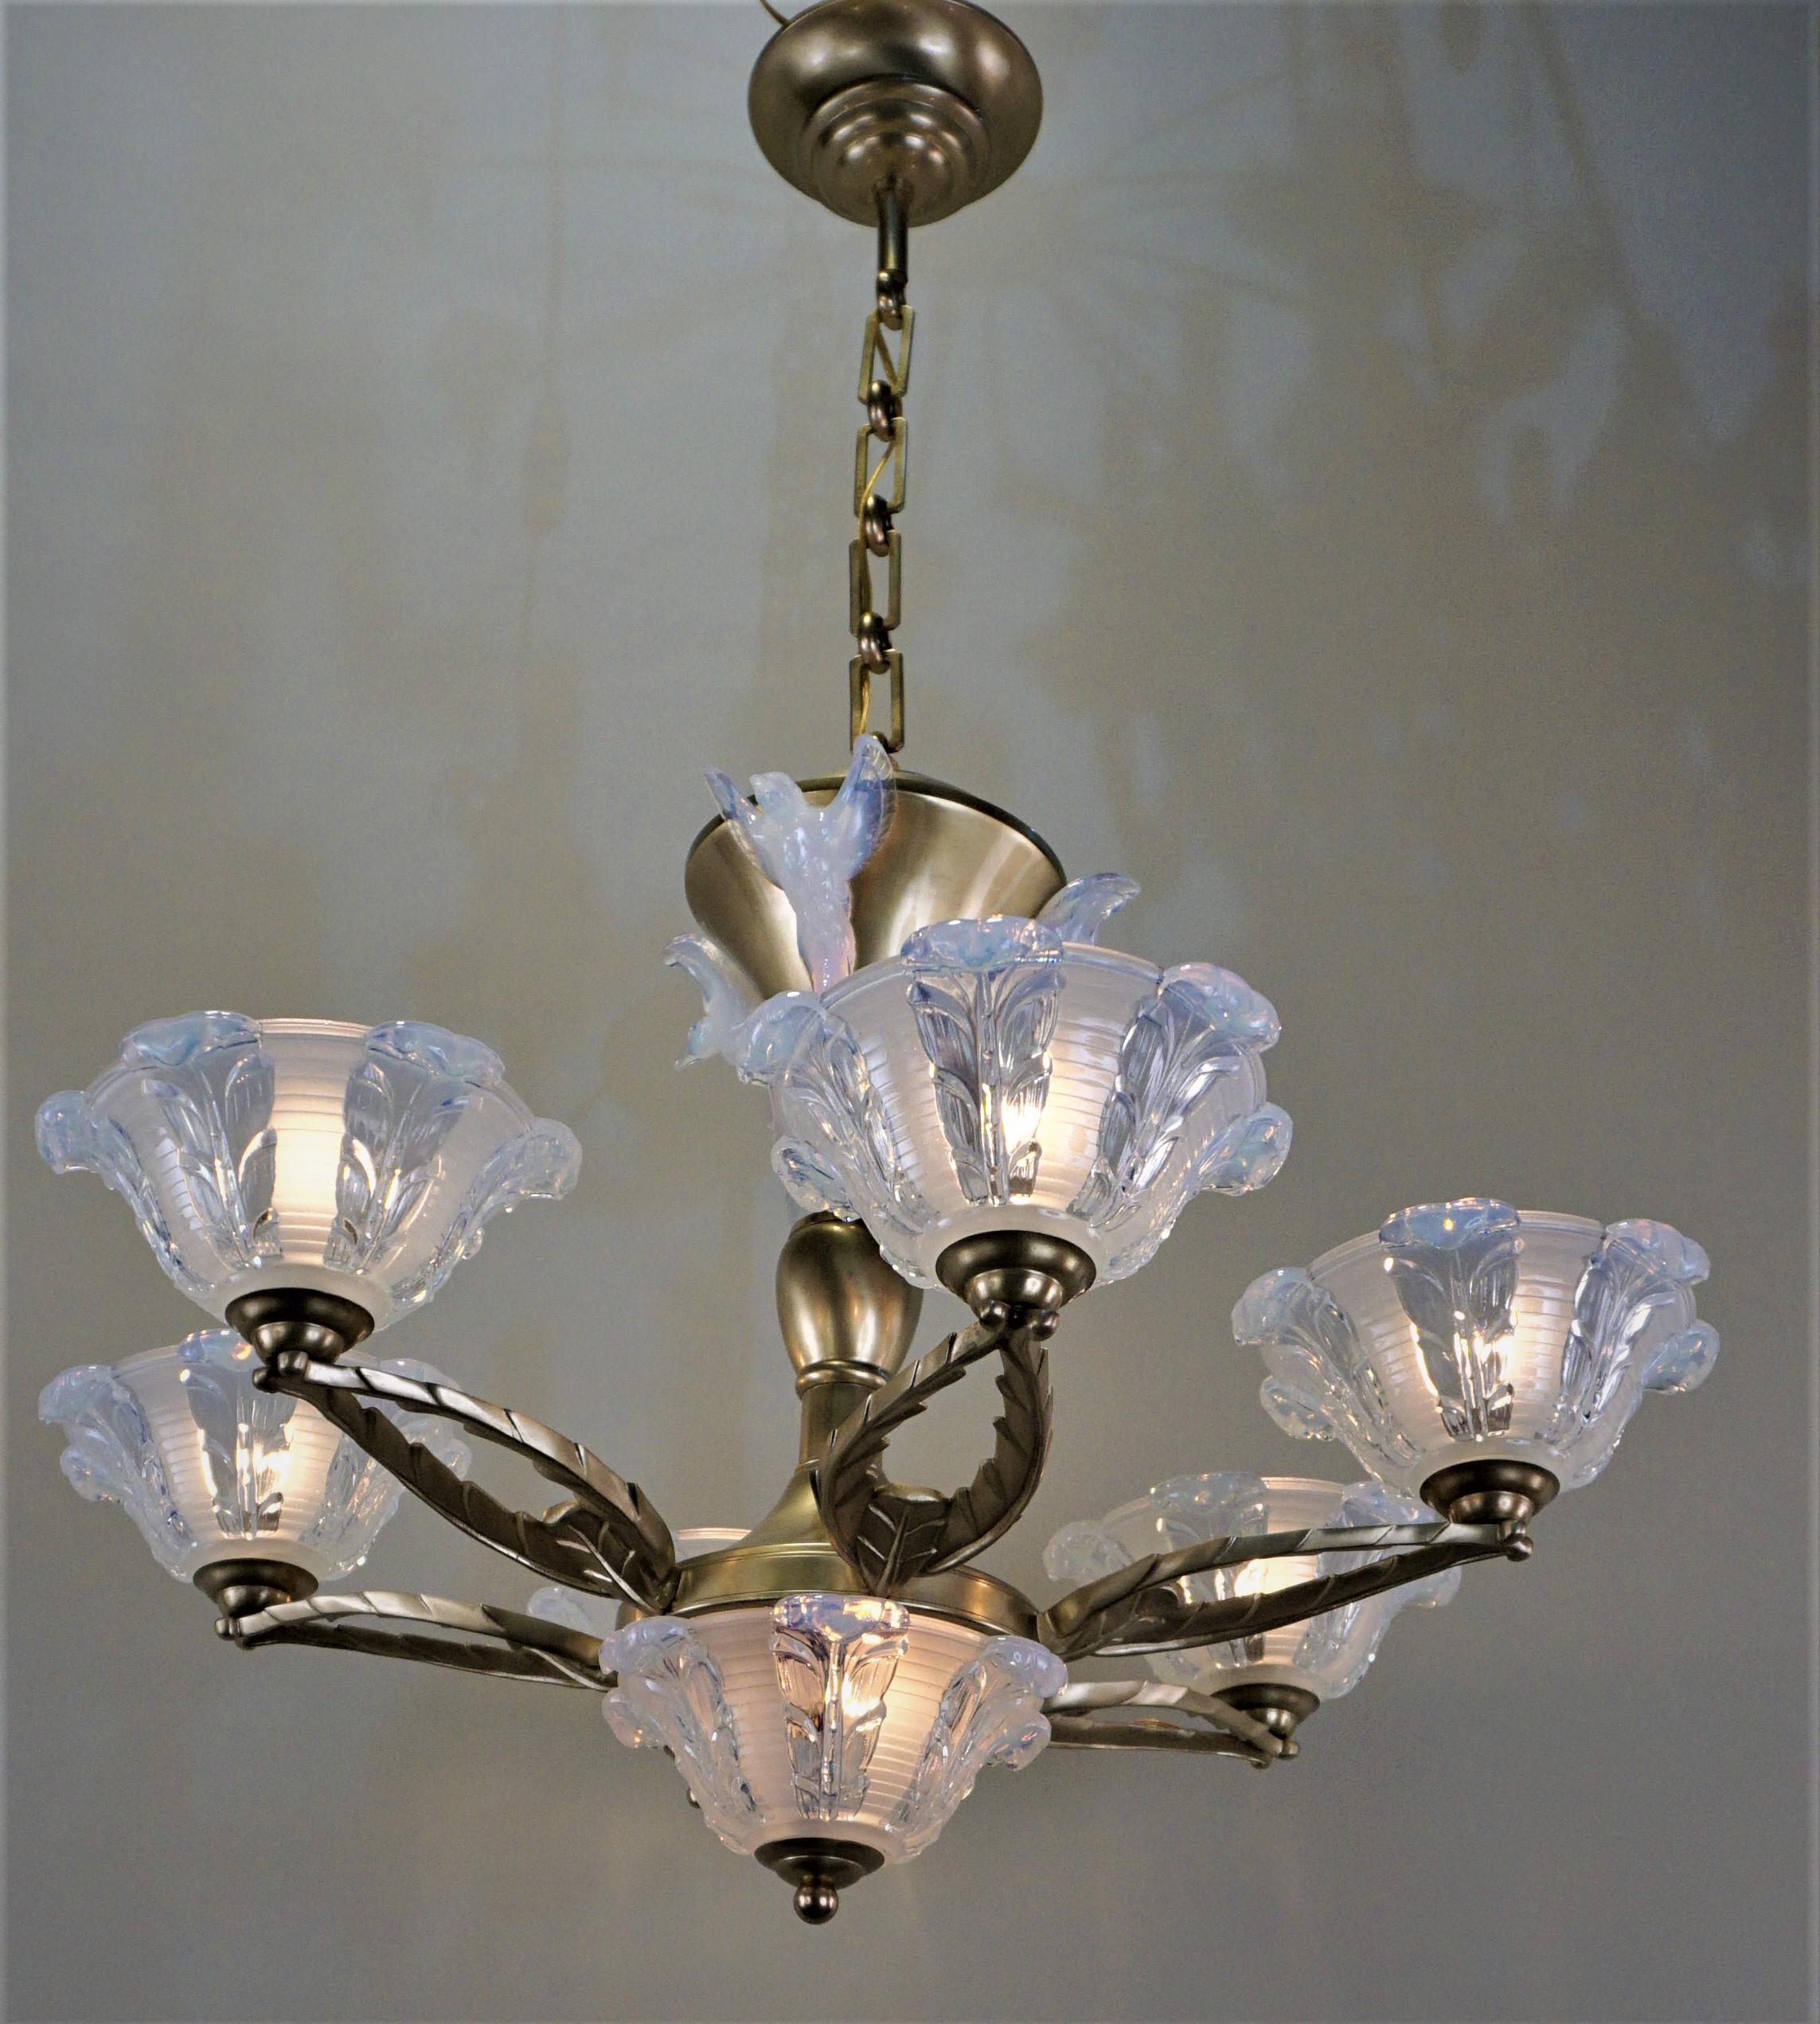 Masterfully crafted in France by noted designer Ezan & Petitot. This Art Deco chandelier is truly elegant. Made of satin finish bronze, this six-arm chandelier features beautiful opaline glass and a total of nine lights.

   